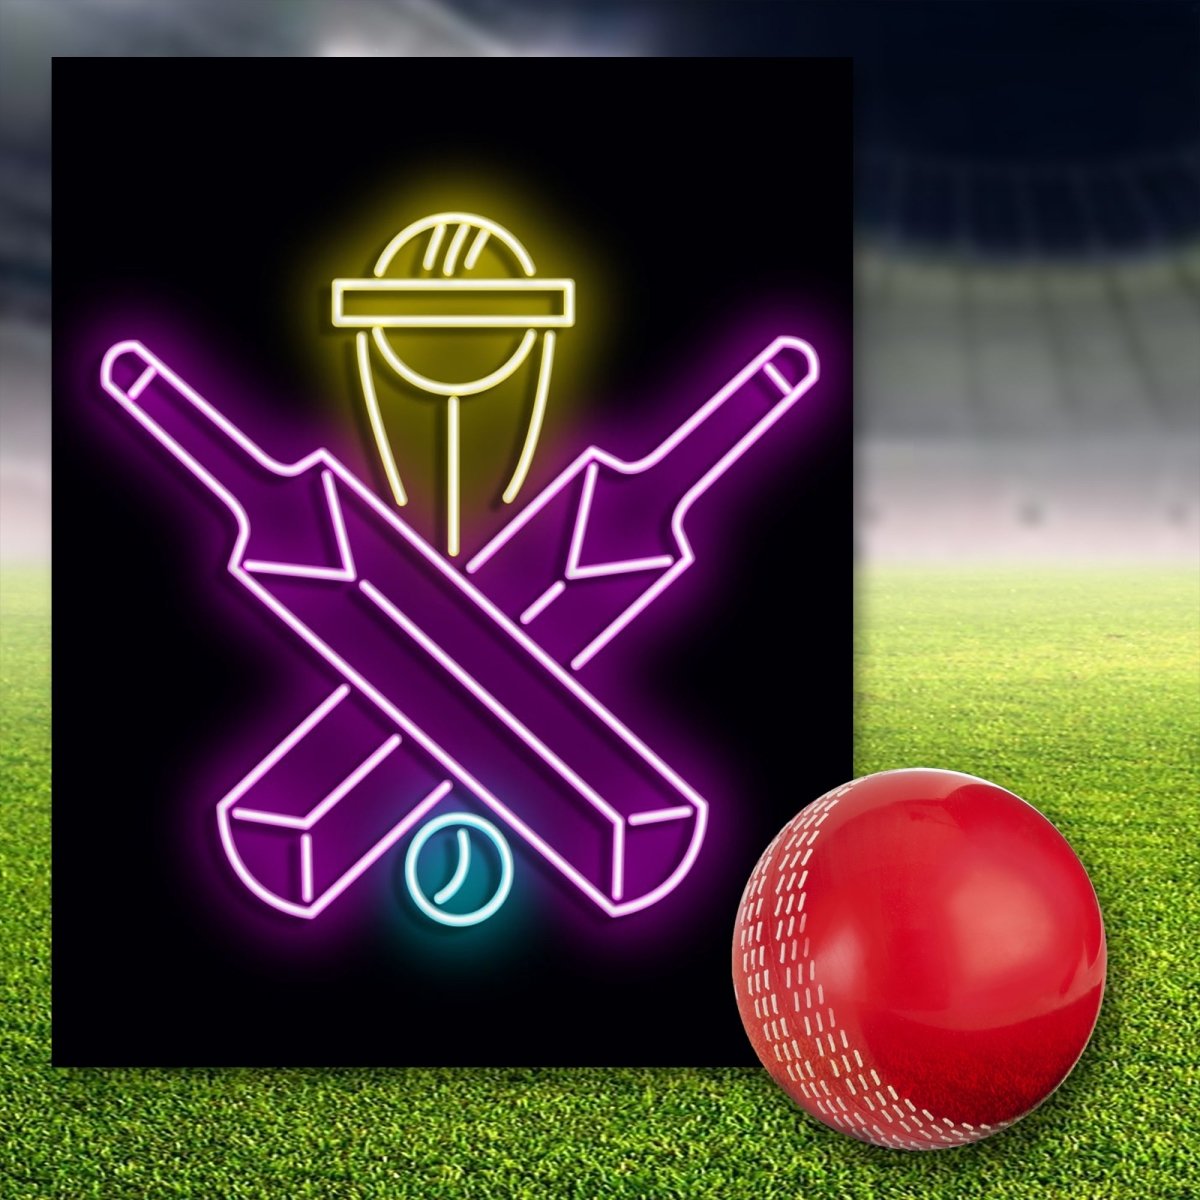 Personalised LED Neon Sign CRICKET 2 - madaboutneon